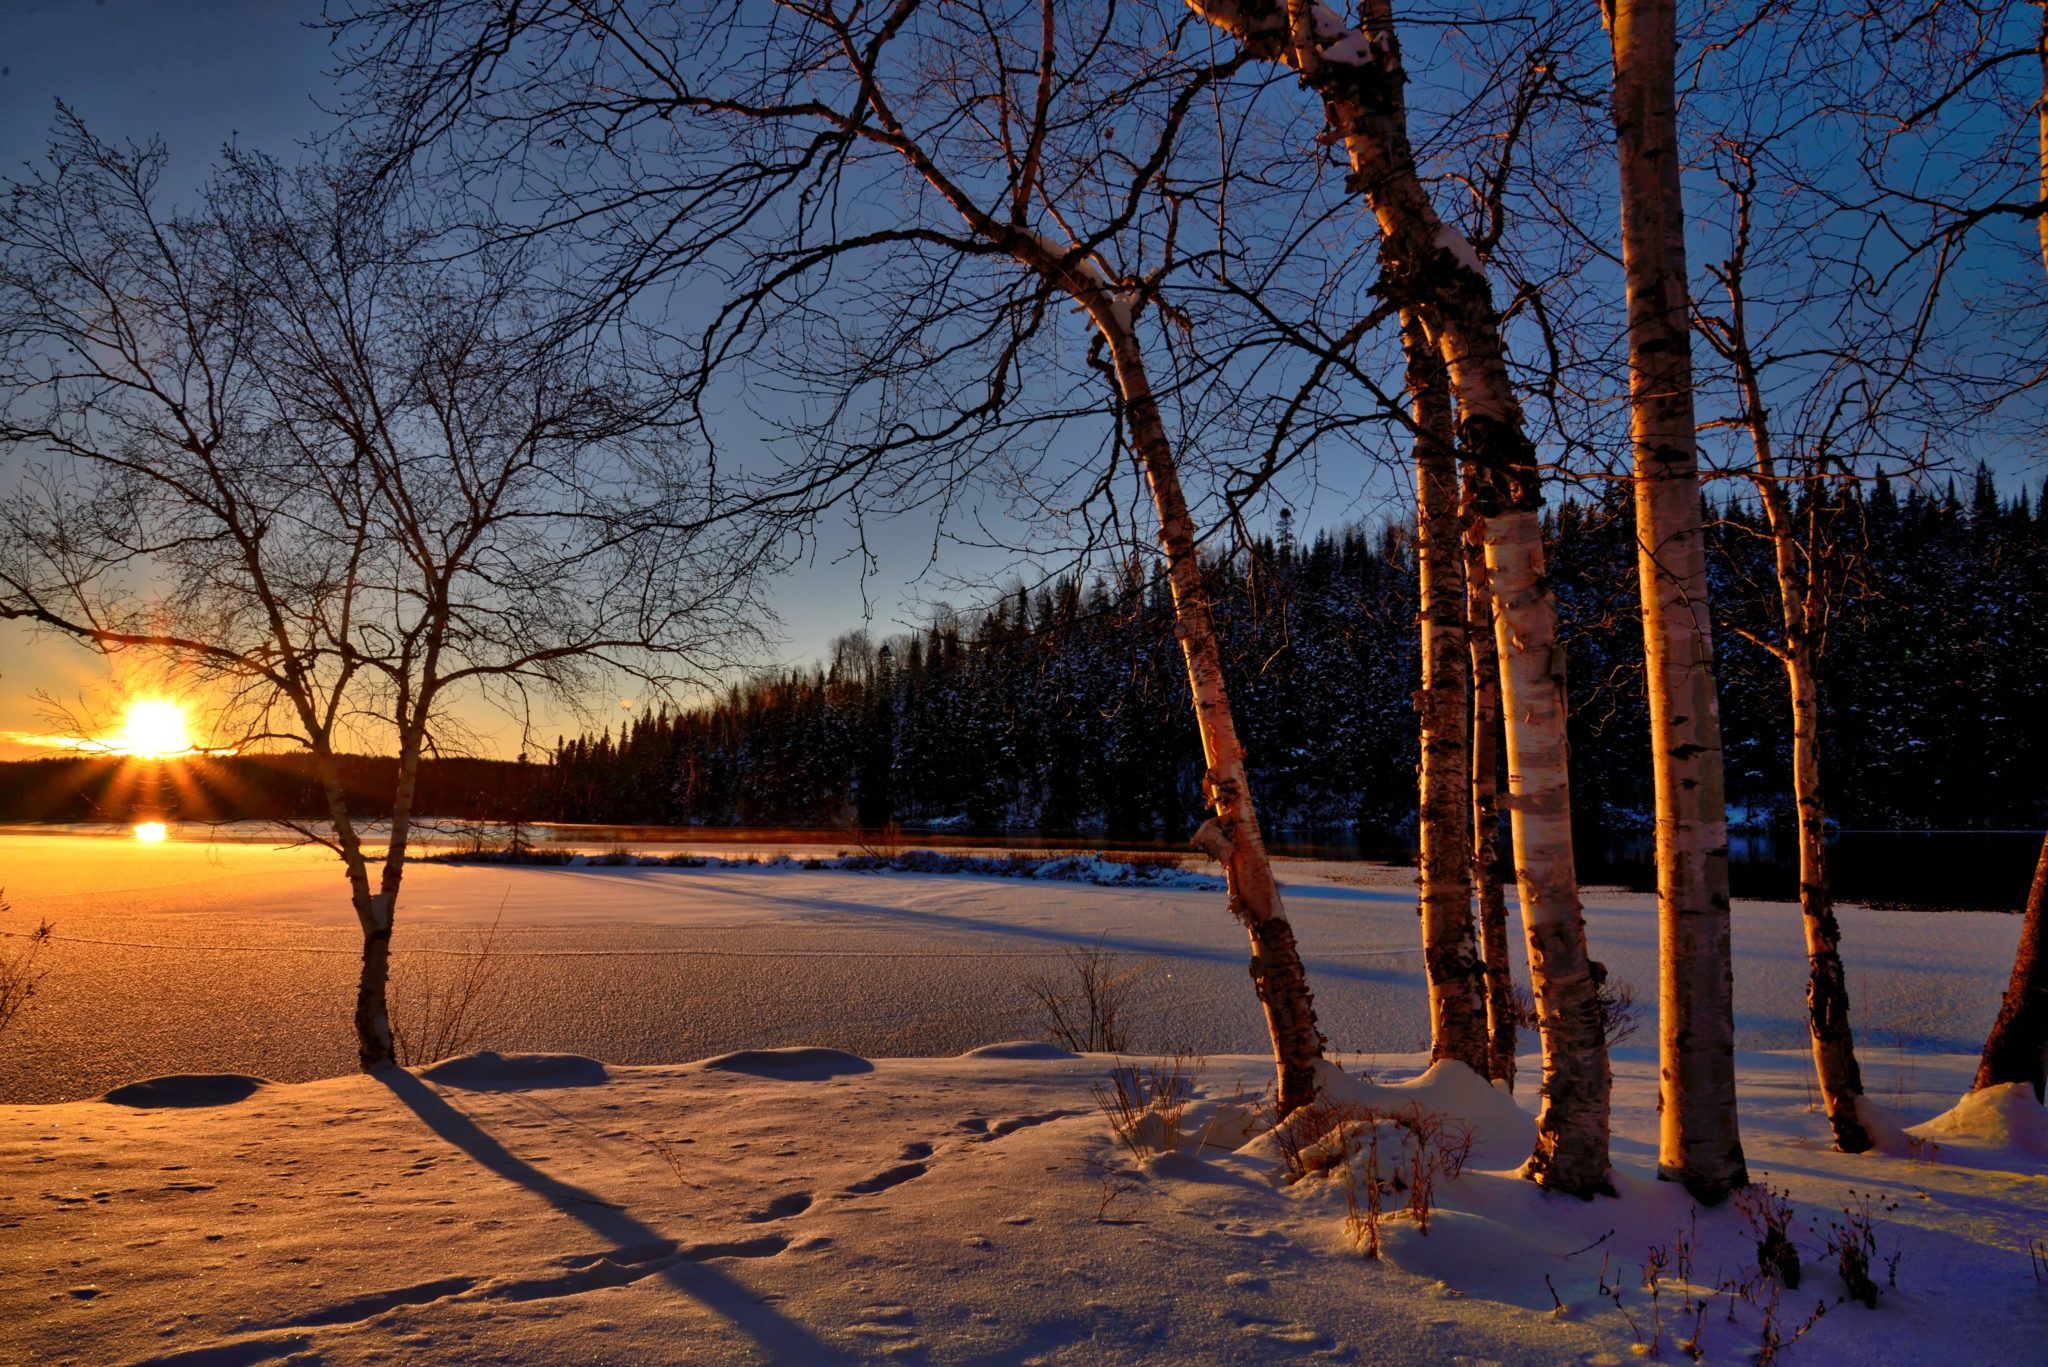 sunset view of a snowy lake surrounded by pine trees